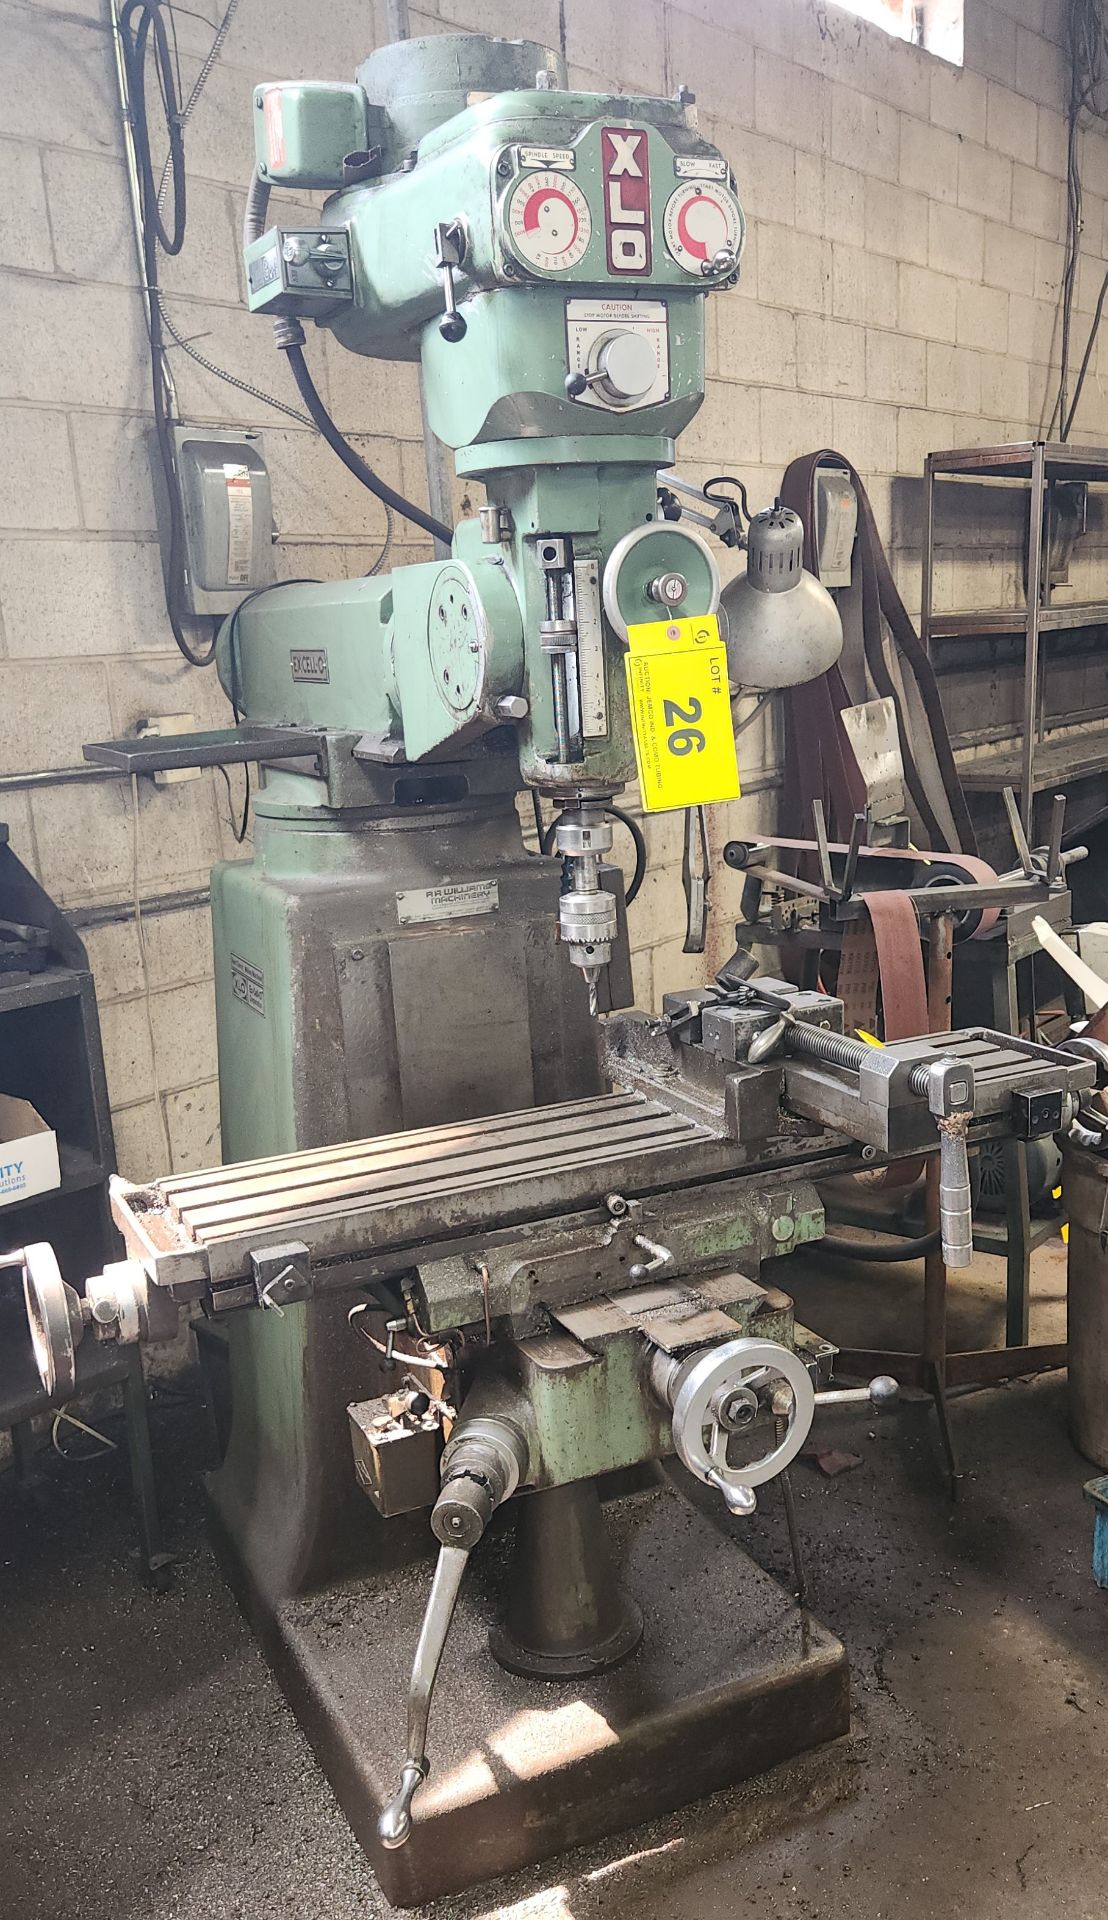 EX-CELL-O MILLING MACHINE, S/N 6026121